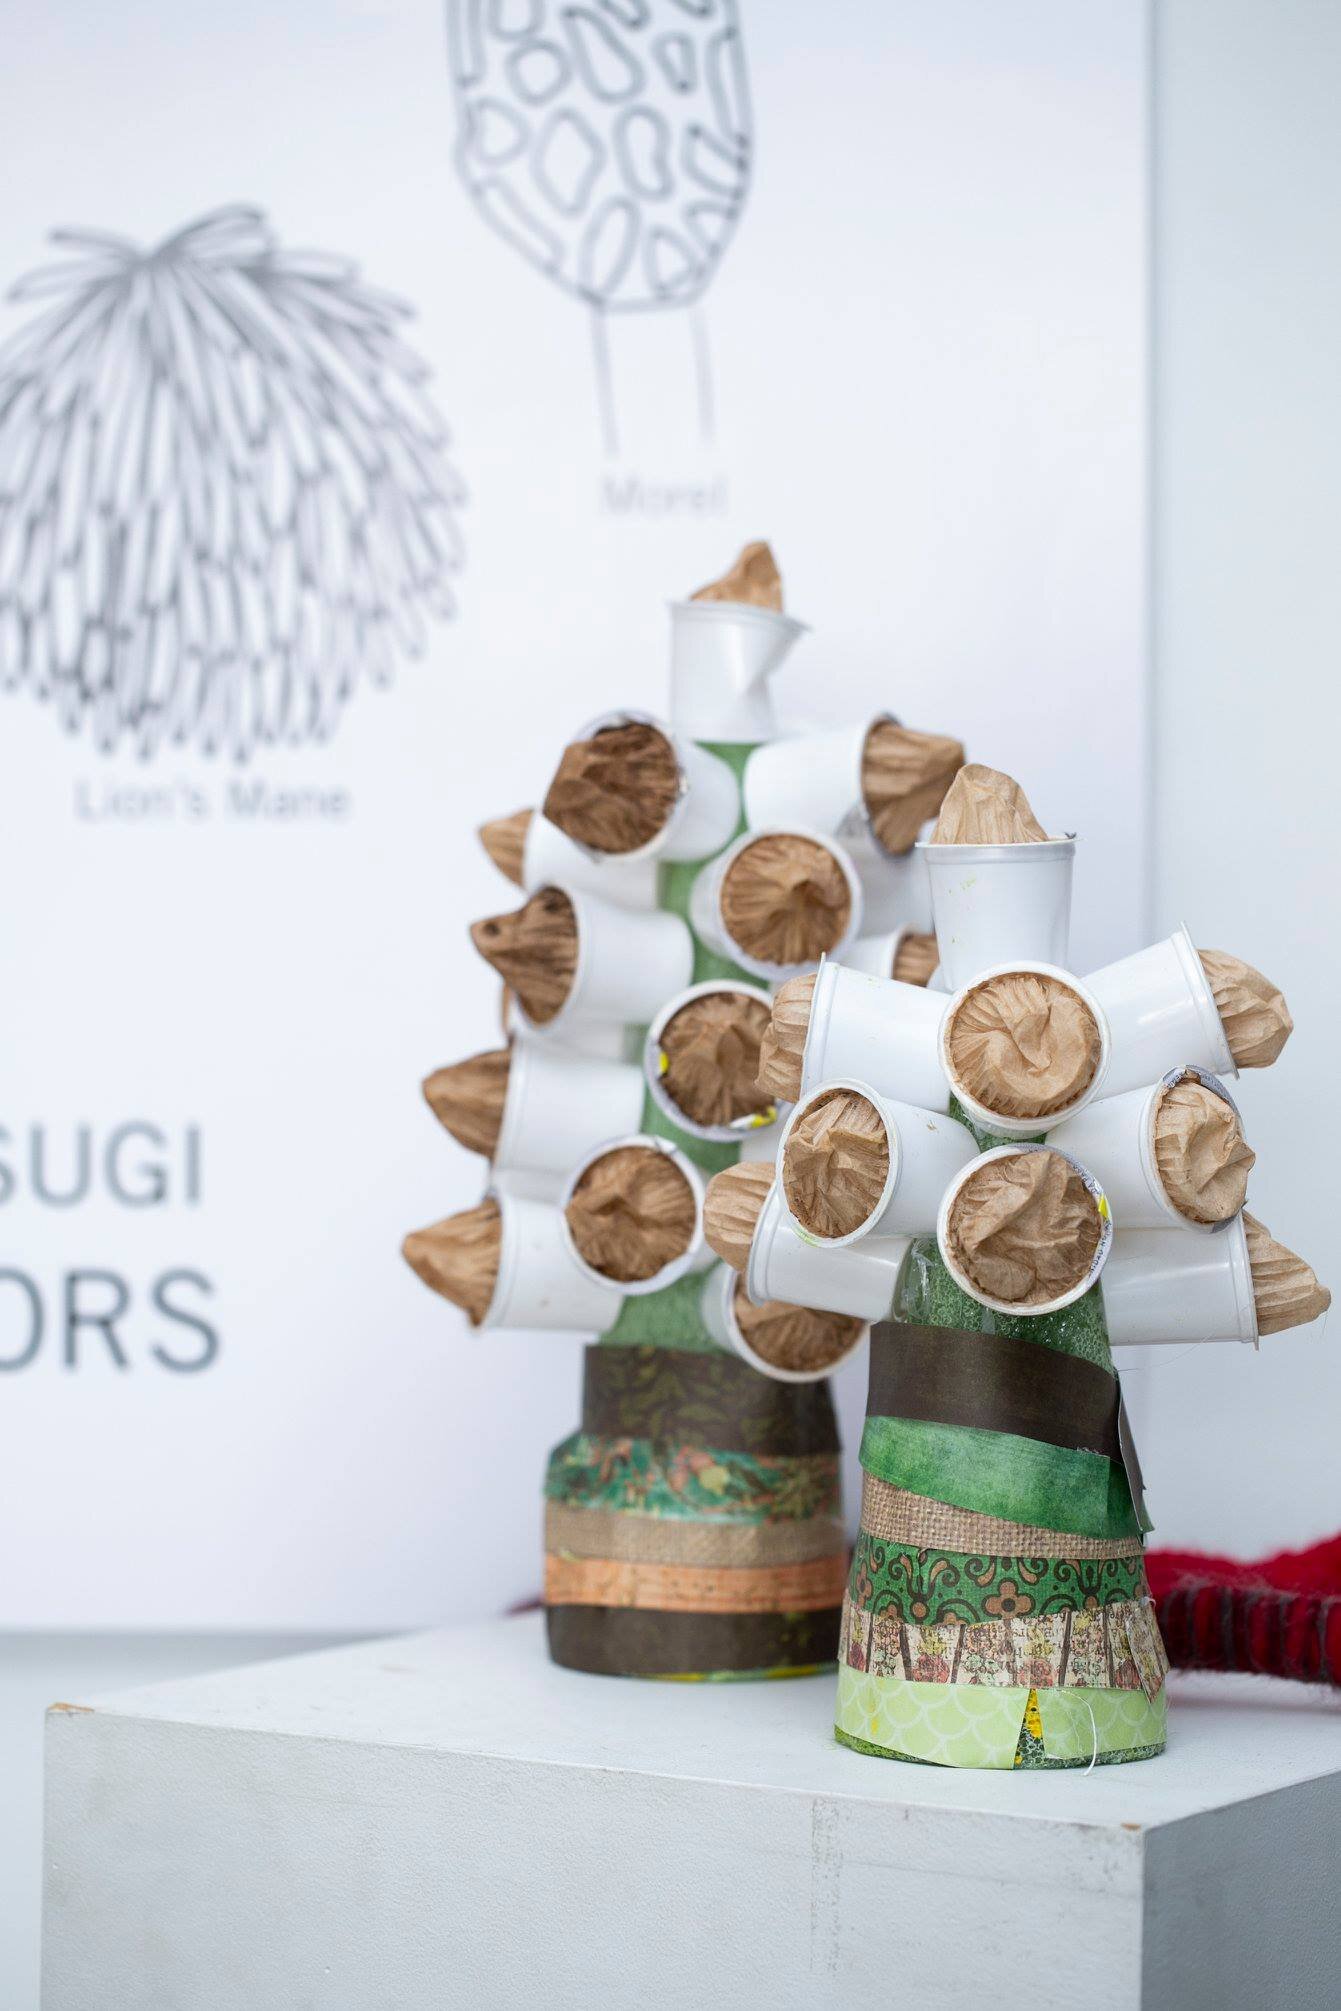  Mushroom sculptures created by local students.   Photograph by Karson Photography 